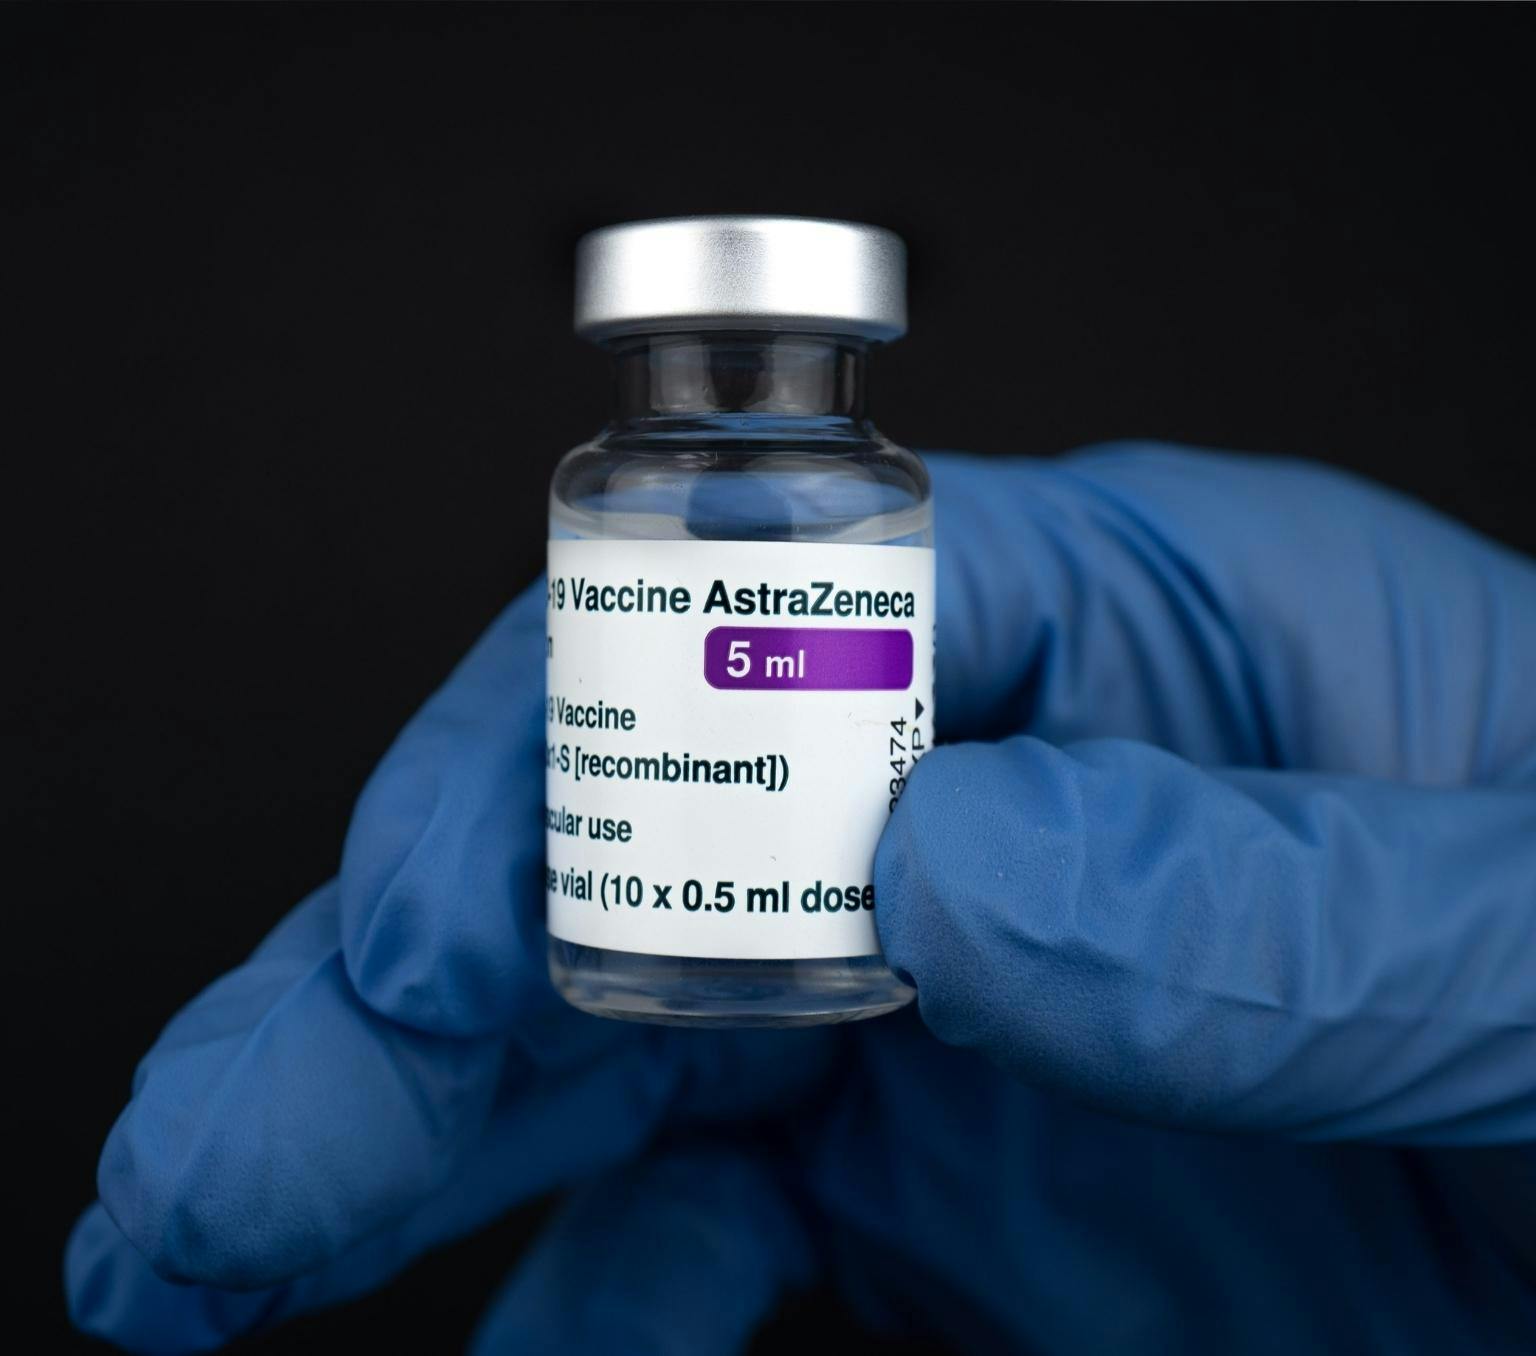 An astraveneca covid vaccine vial is held by a hand wearing blue gloves.